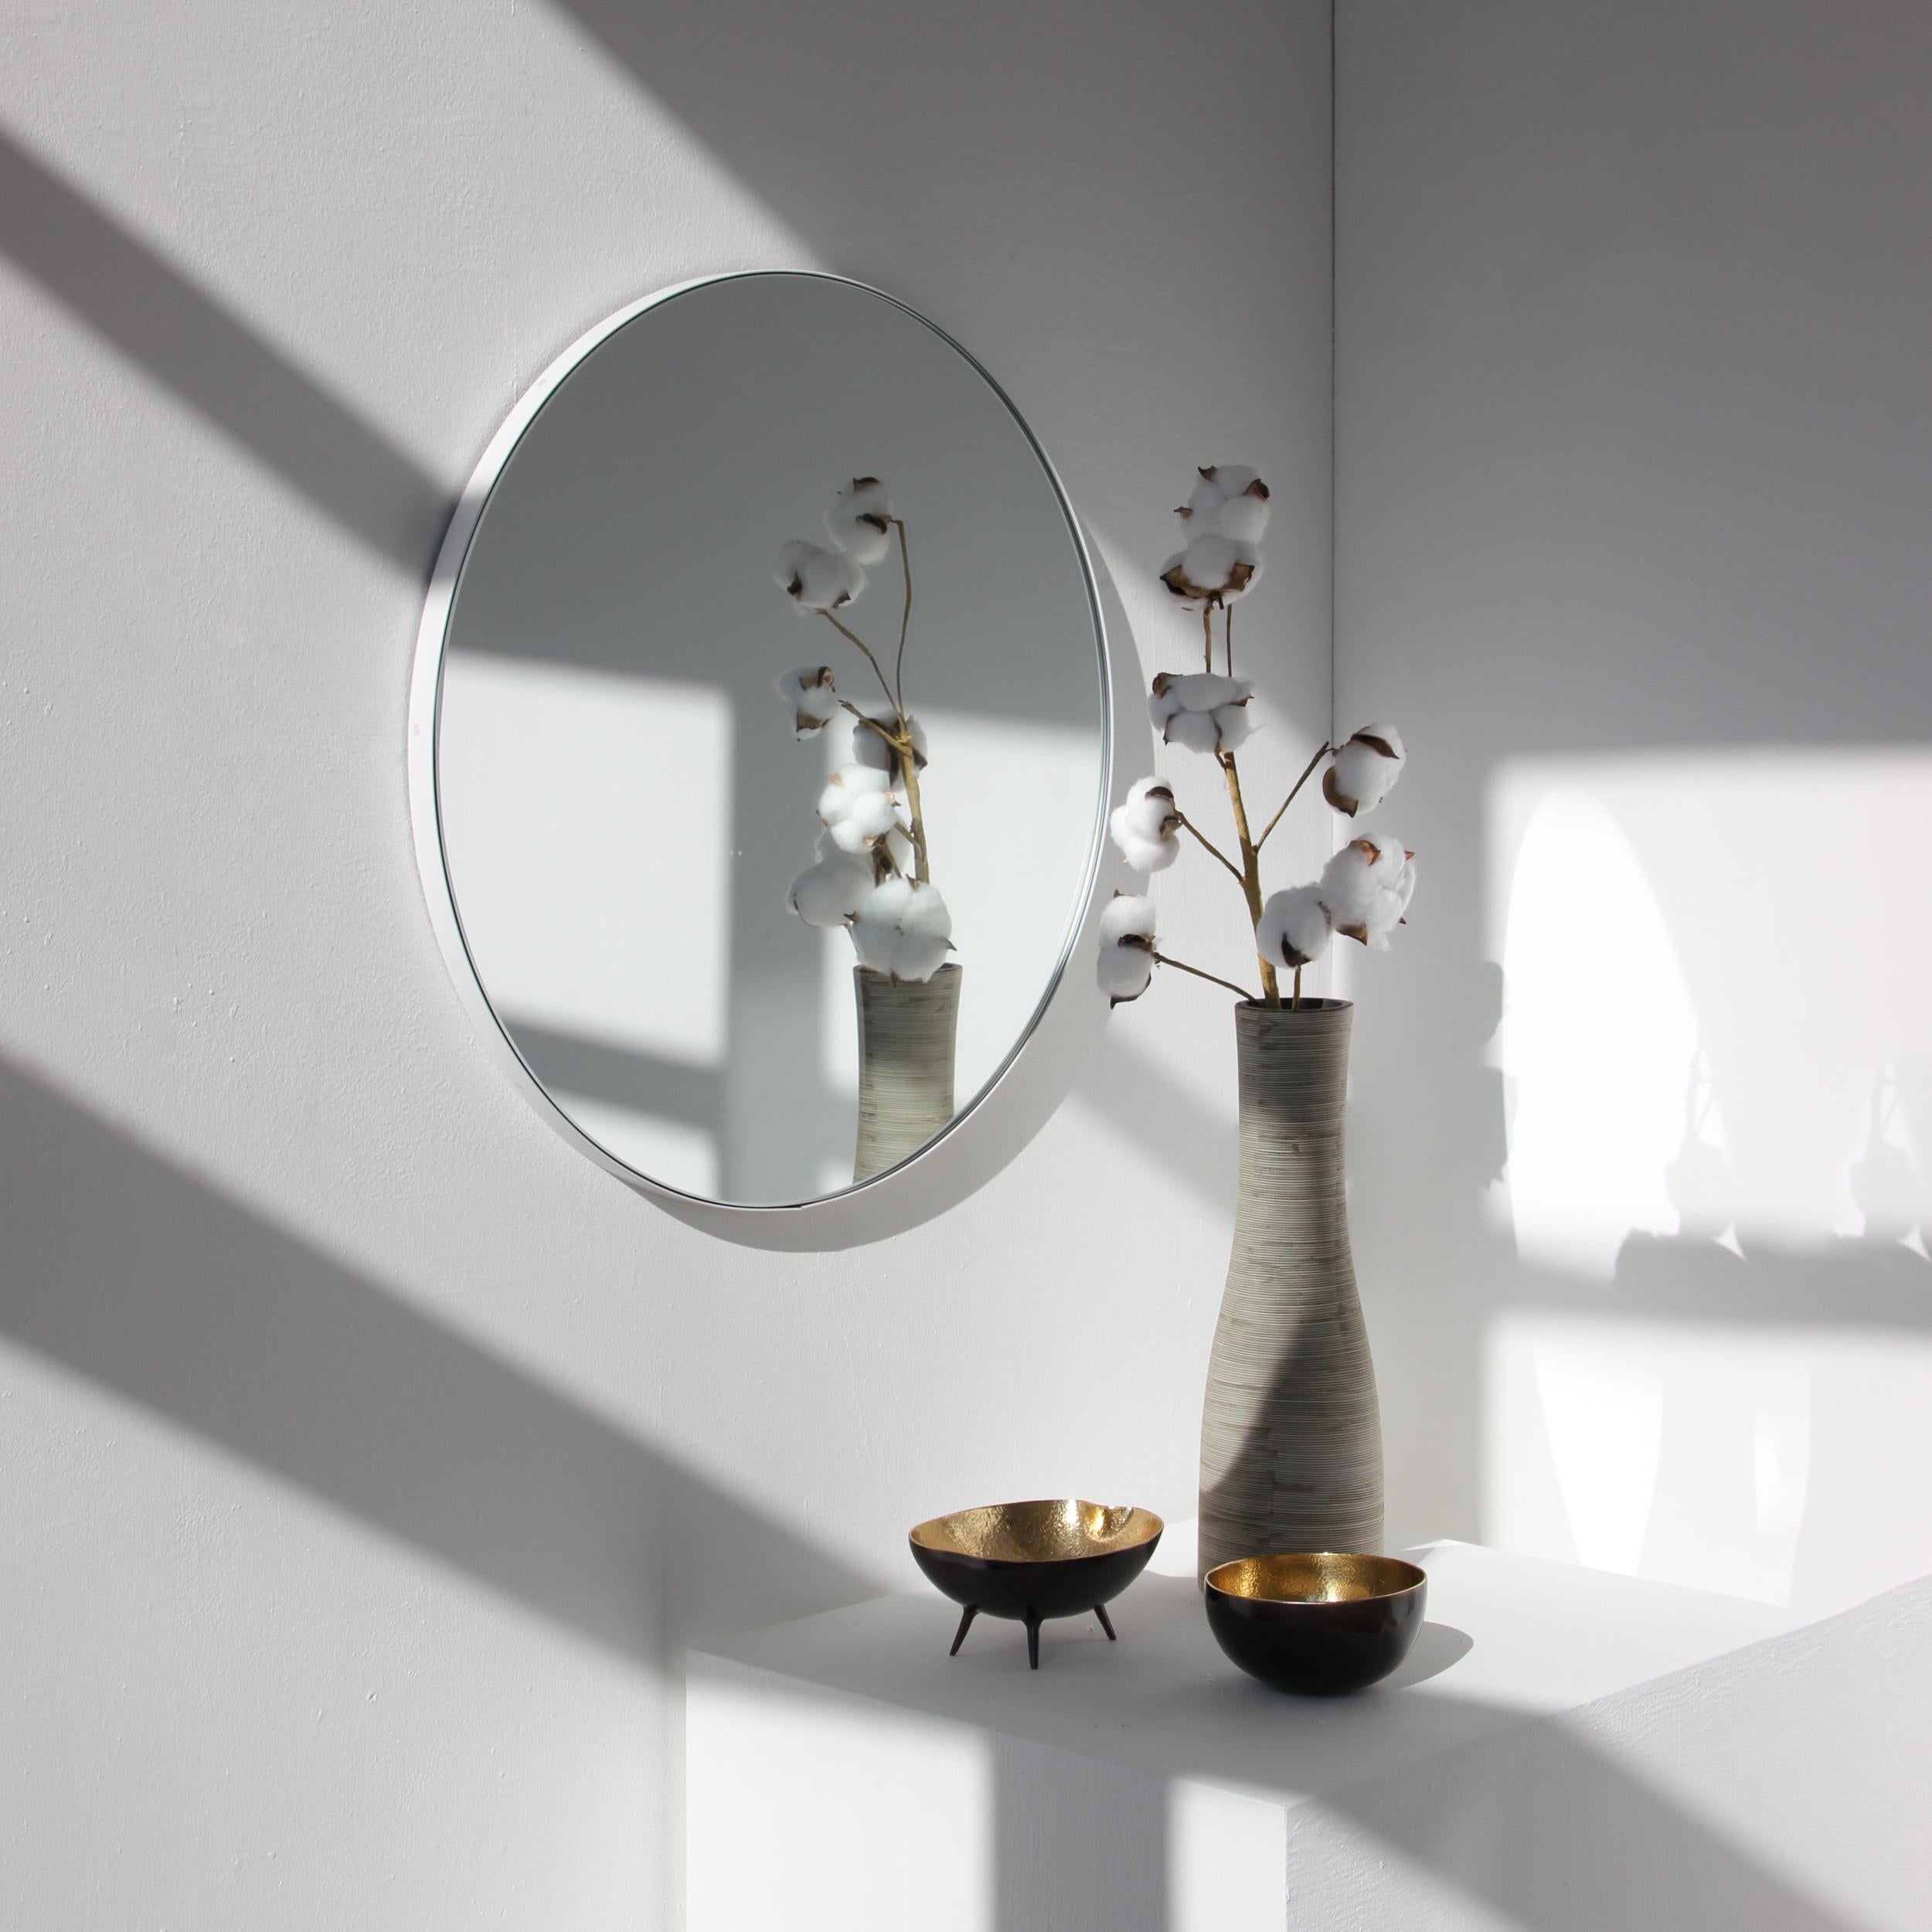 Minimalist round mirror with a modern aluminium powder coated white frame. Designed and handcrafted in London, UK.

Our mirrors are designed with an integrated French cleat (split batten) system that ensures the mirror is securely mounted flush with